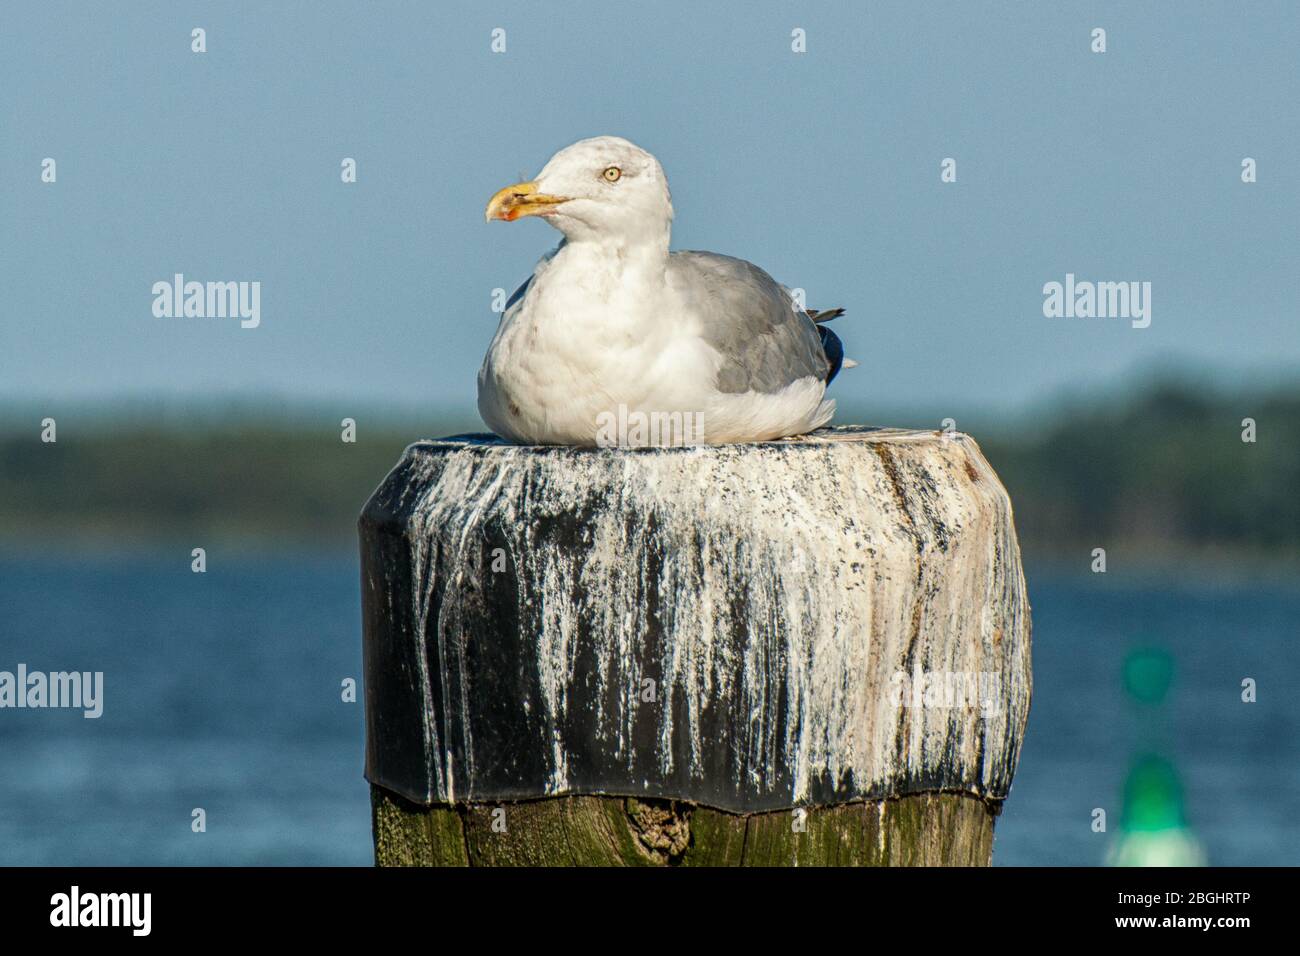 A seagull sits on a post Stock Photo